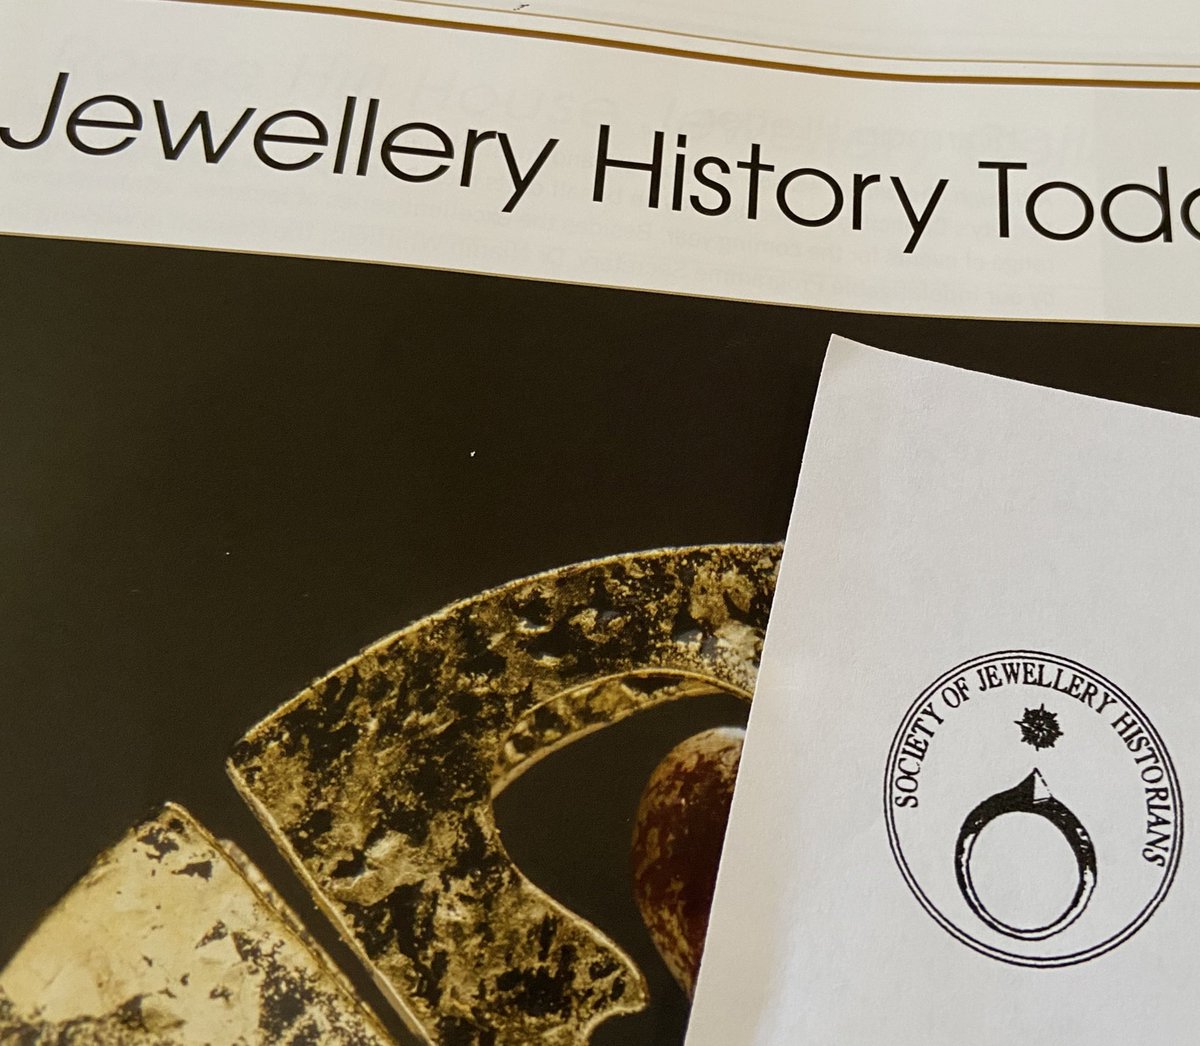 Well this is rather exciting post today - thank you @SJH_1977! #jewellery #jewelleryhistory